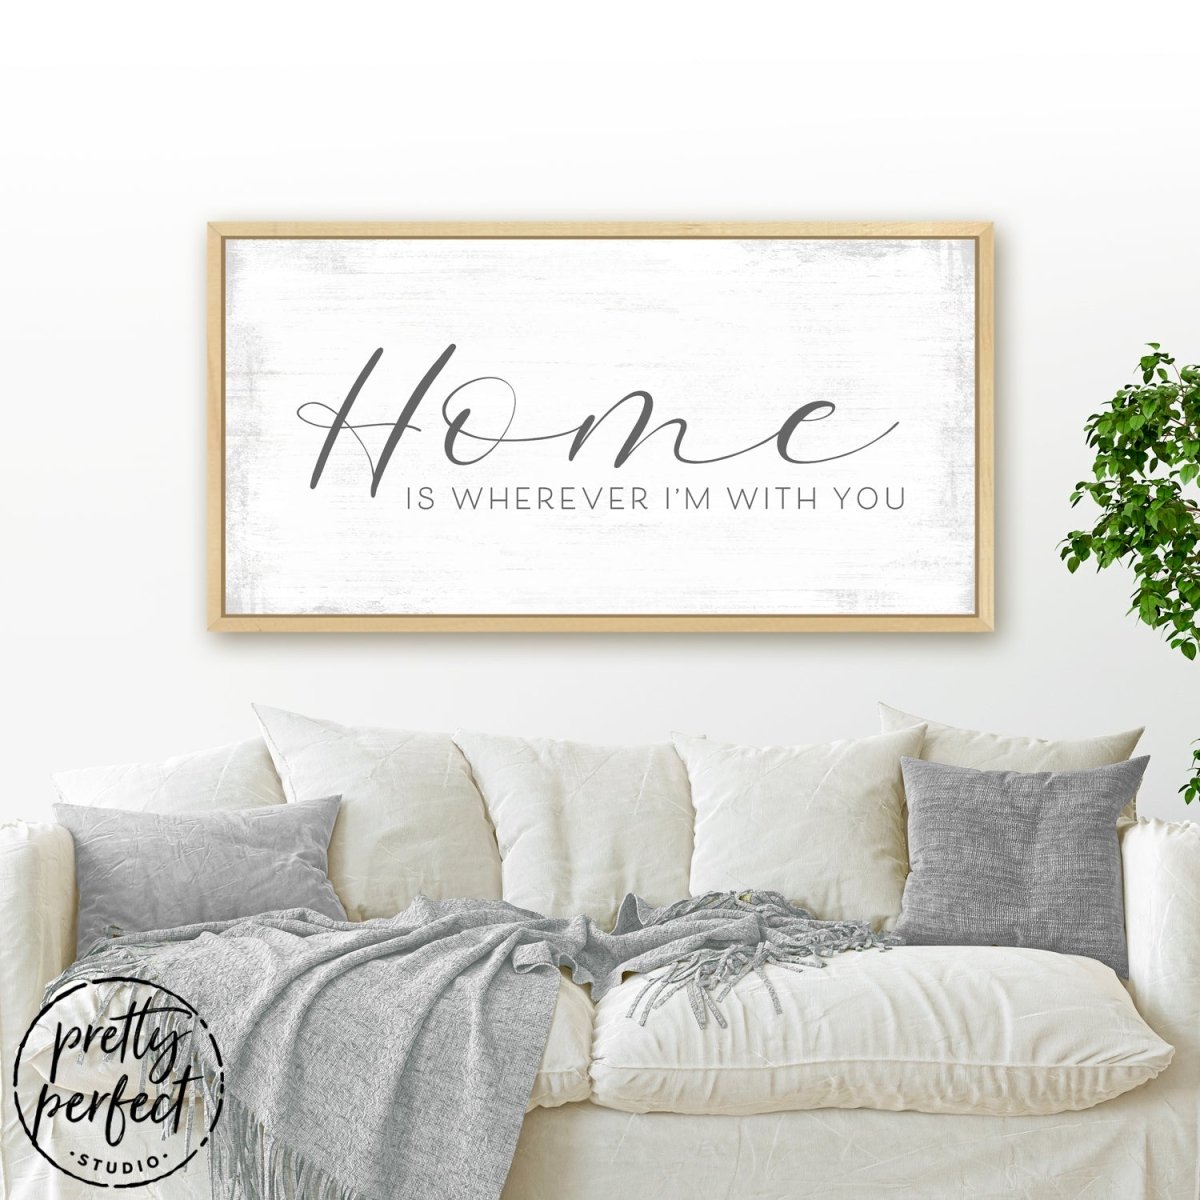 Home Is Wherever I'm With You Sign Above Couch - Pretty Perfect Studio